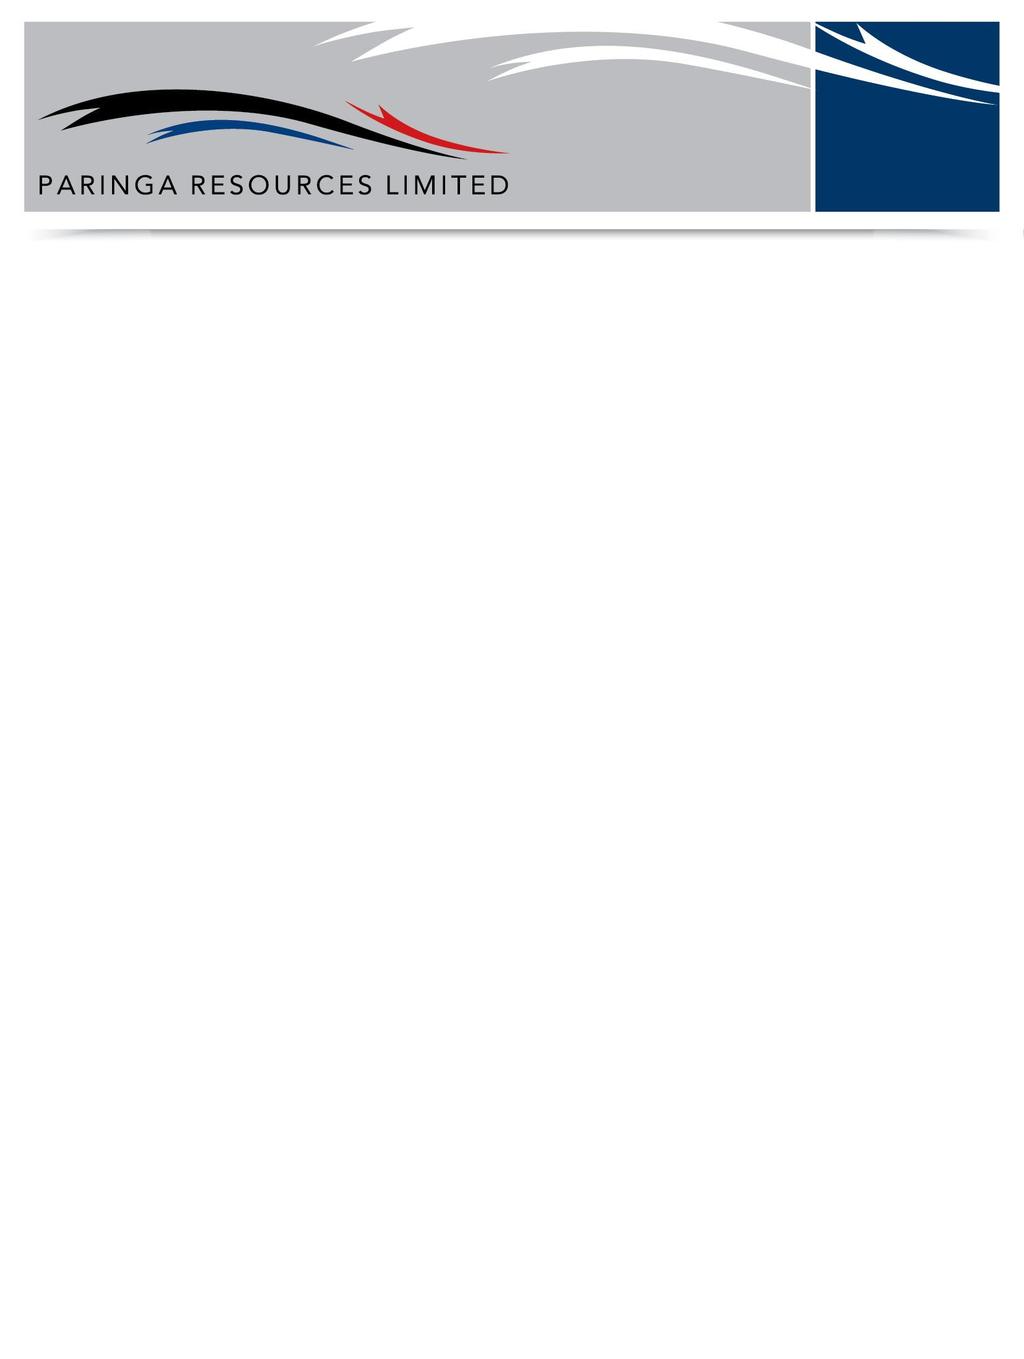 19 October 2015 PARINGA CONTRACTS FUTURE COAL SALES TOTALING US$220 MILLION WITH A MAJOR UTILITY HIGHLIGHTS: Paringa has executed its cornerstone coal sales agreement with LG&E and KU, two of the